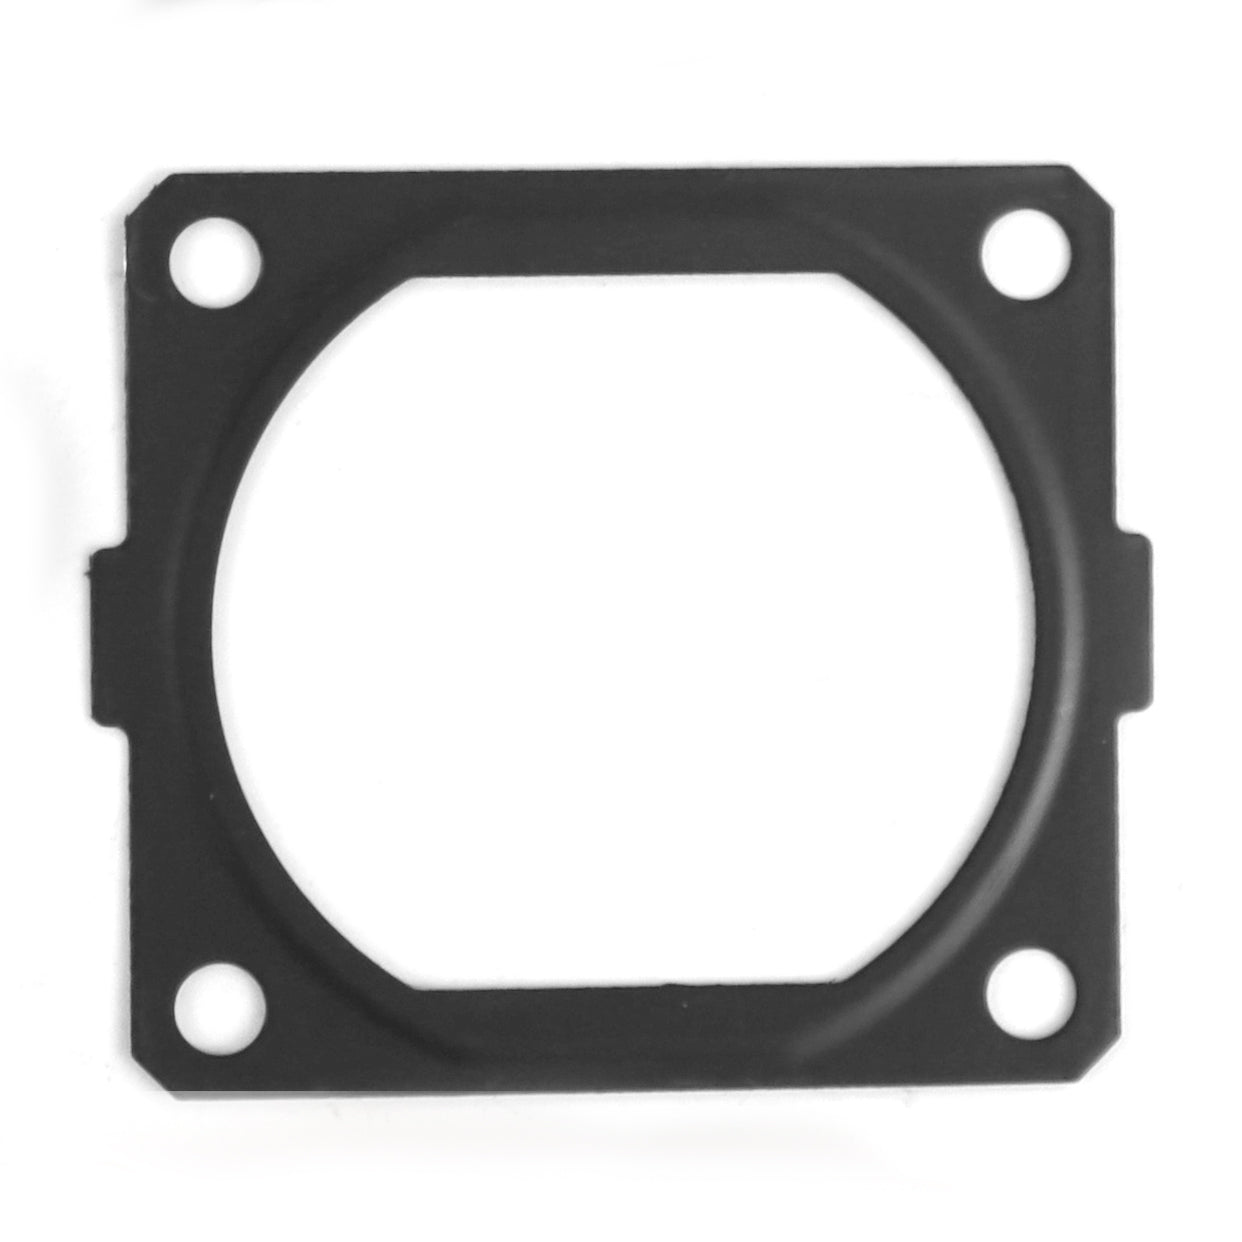 Cylinder Gasket 0.5 mm Fit For Stihl 066 MS650 MS660 #1122 029 